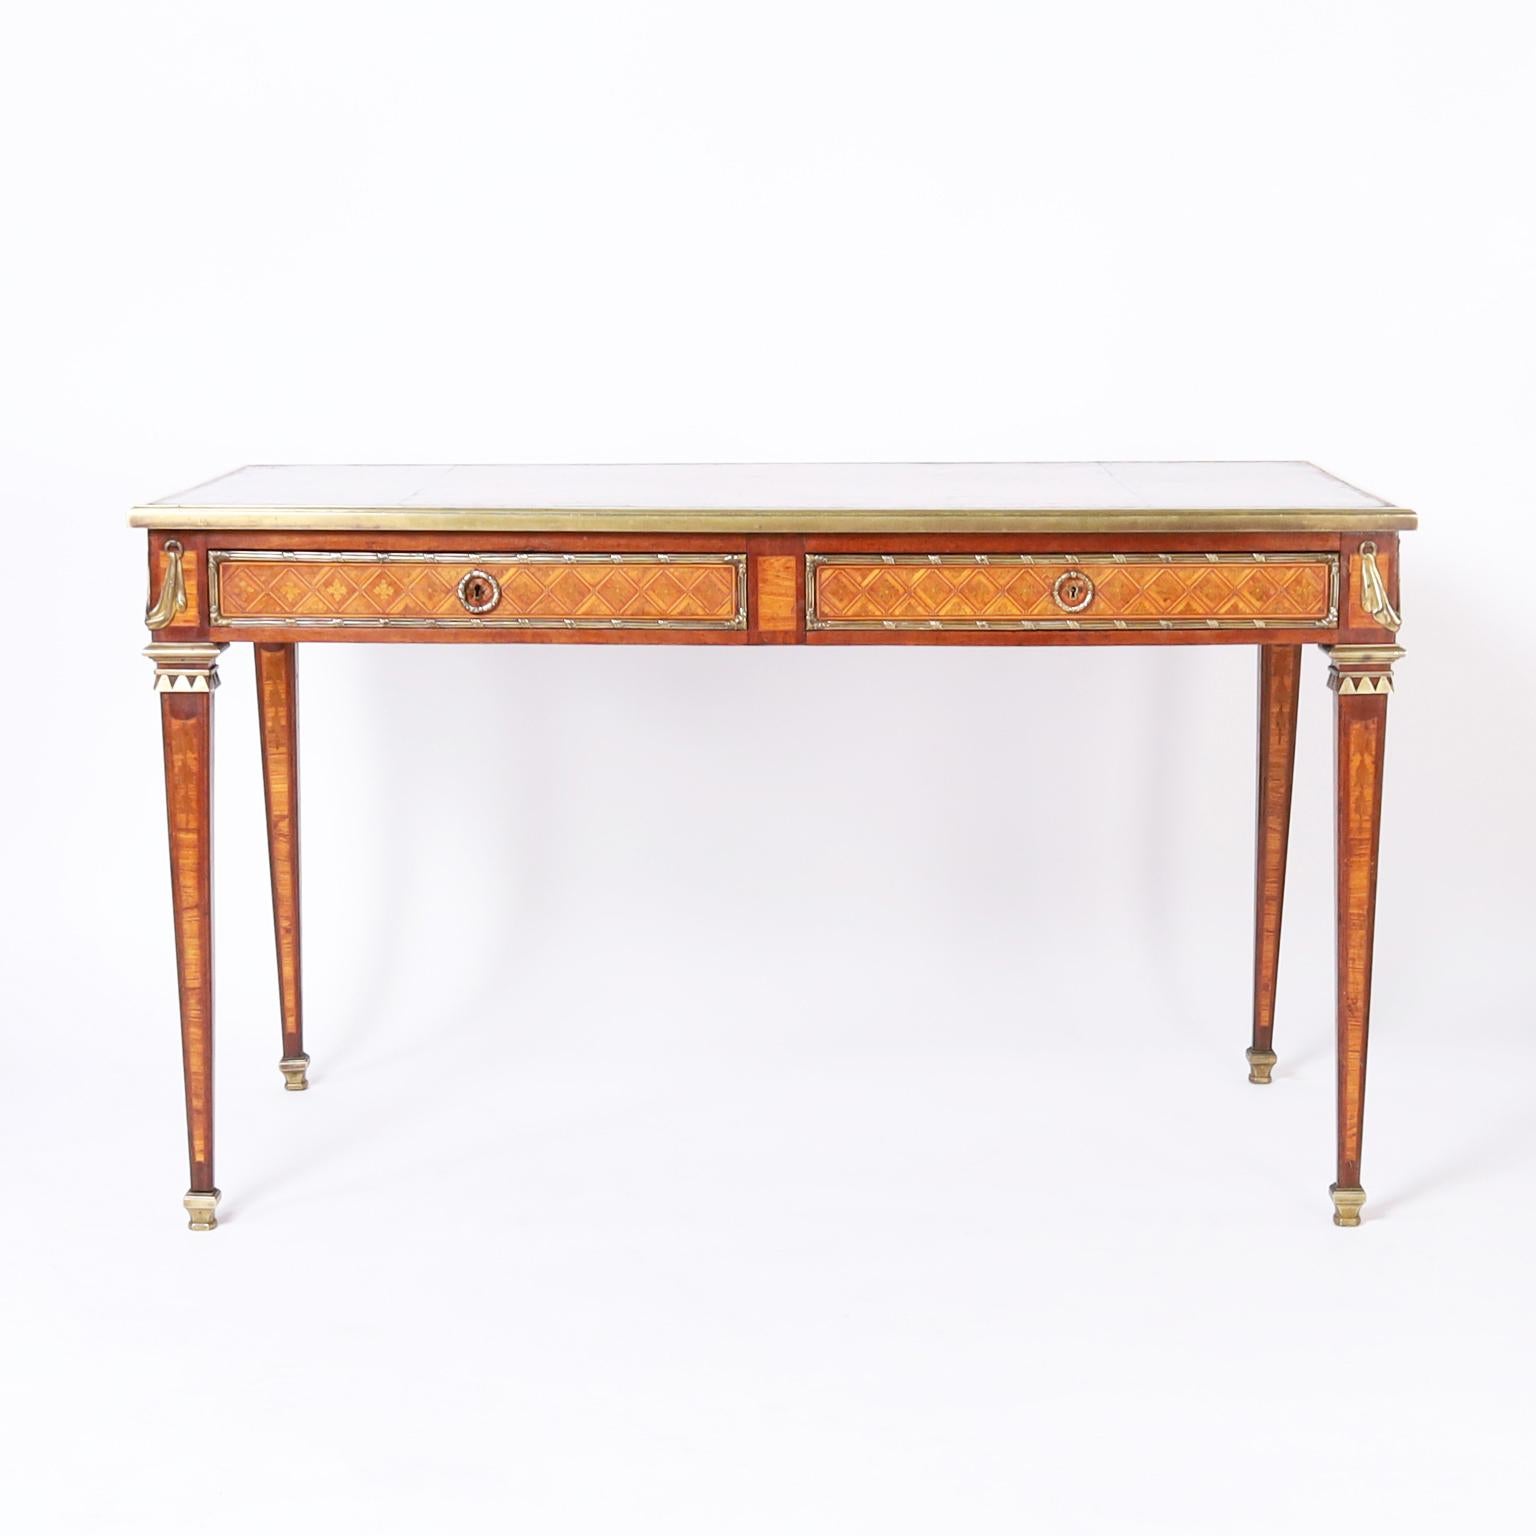 Impressive 19th century French desk with the original tooled leather top now aged to perfection over a two drawer case decorated with bronze ormolu and inlaid marquetry on elegant tapered legs with satinwood inlays on bronze feet. 